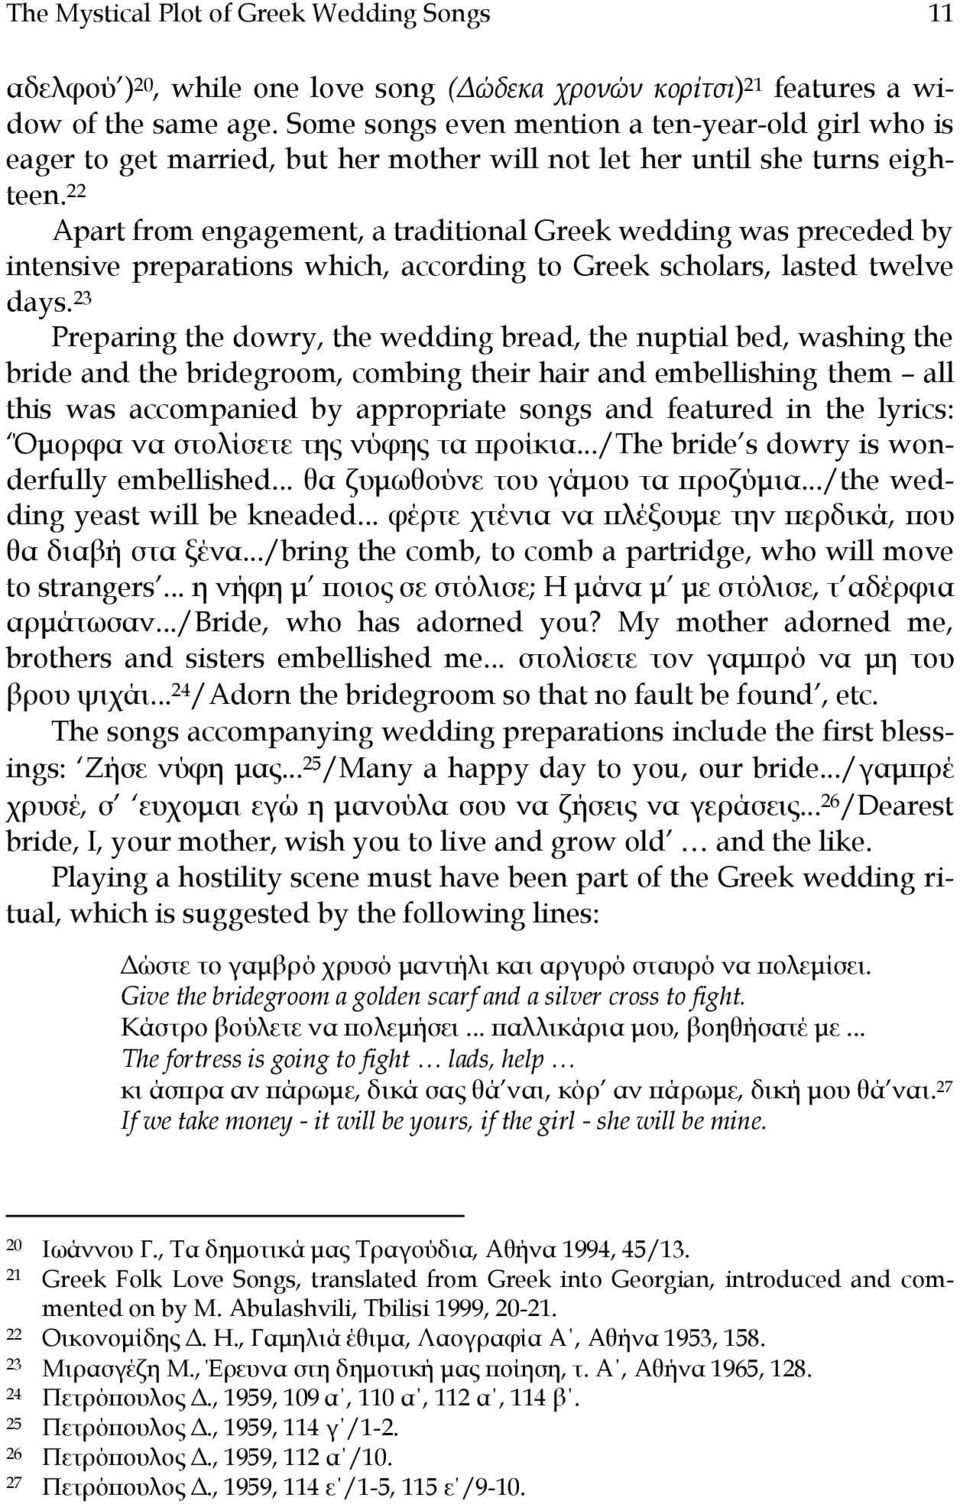 22 Apart from engagement, a traditional Greek wedding was preceded by intensive preparations which, according to Greek scholars, lasted twelve days.